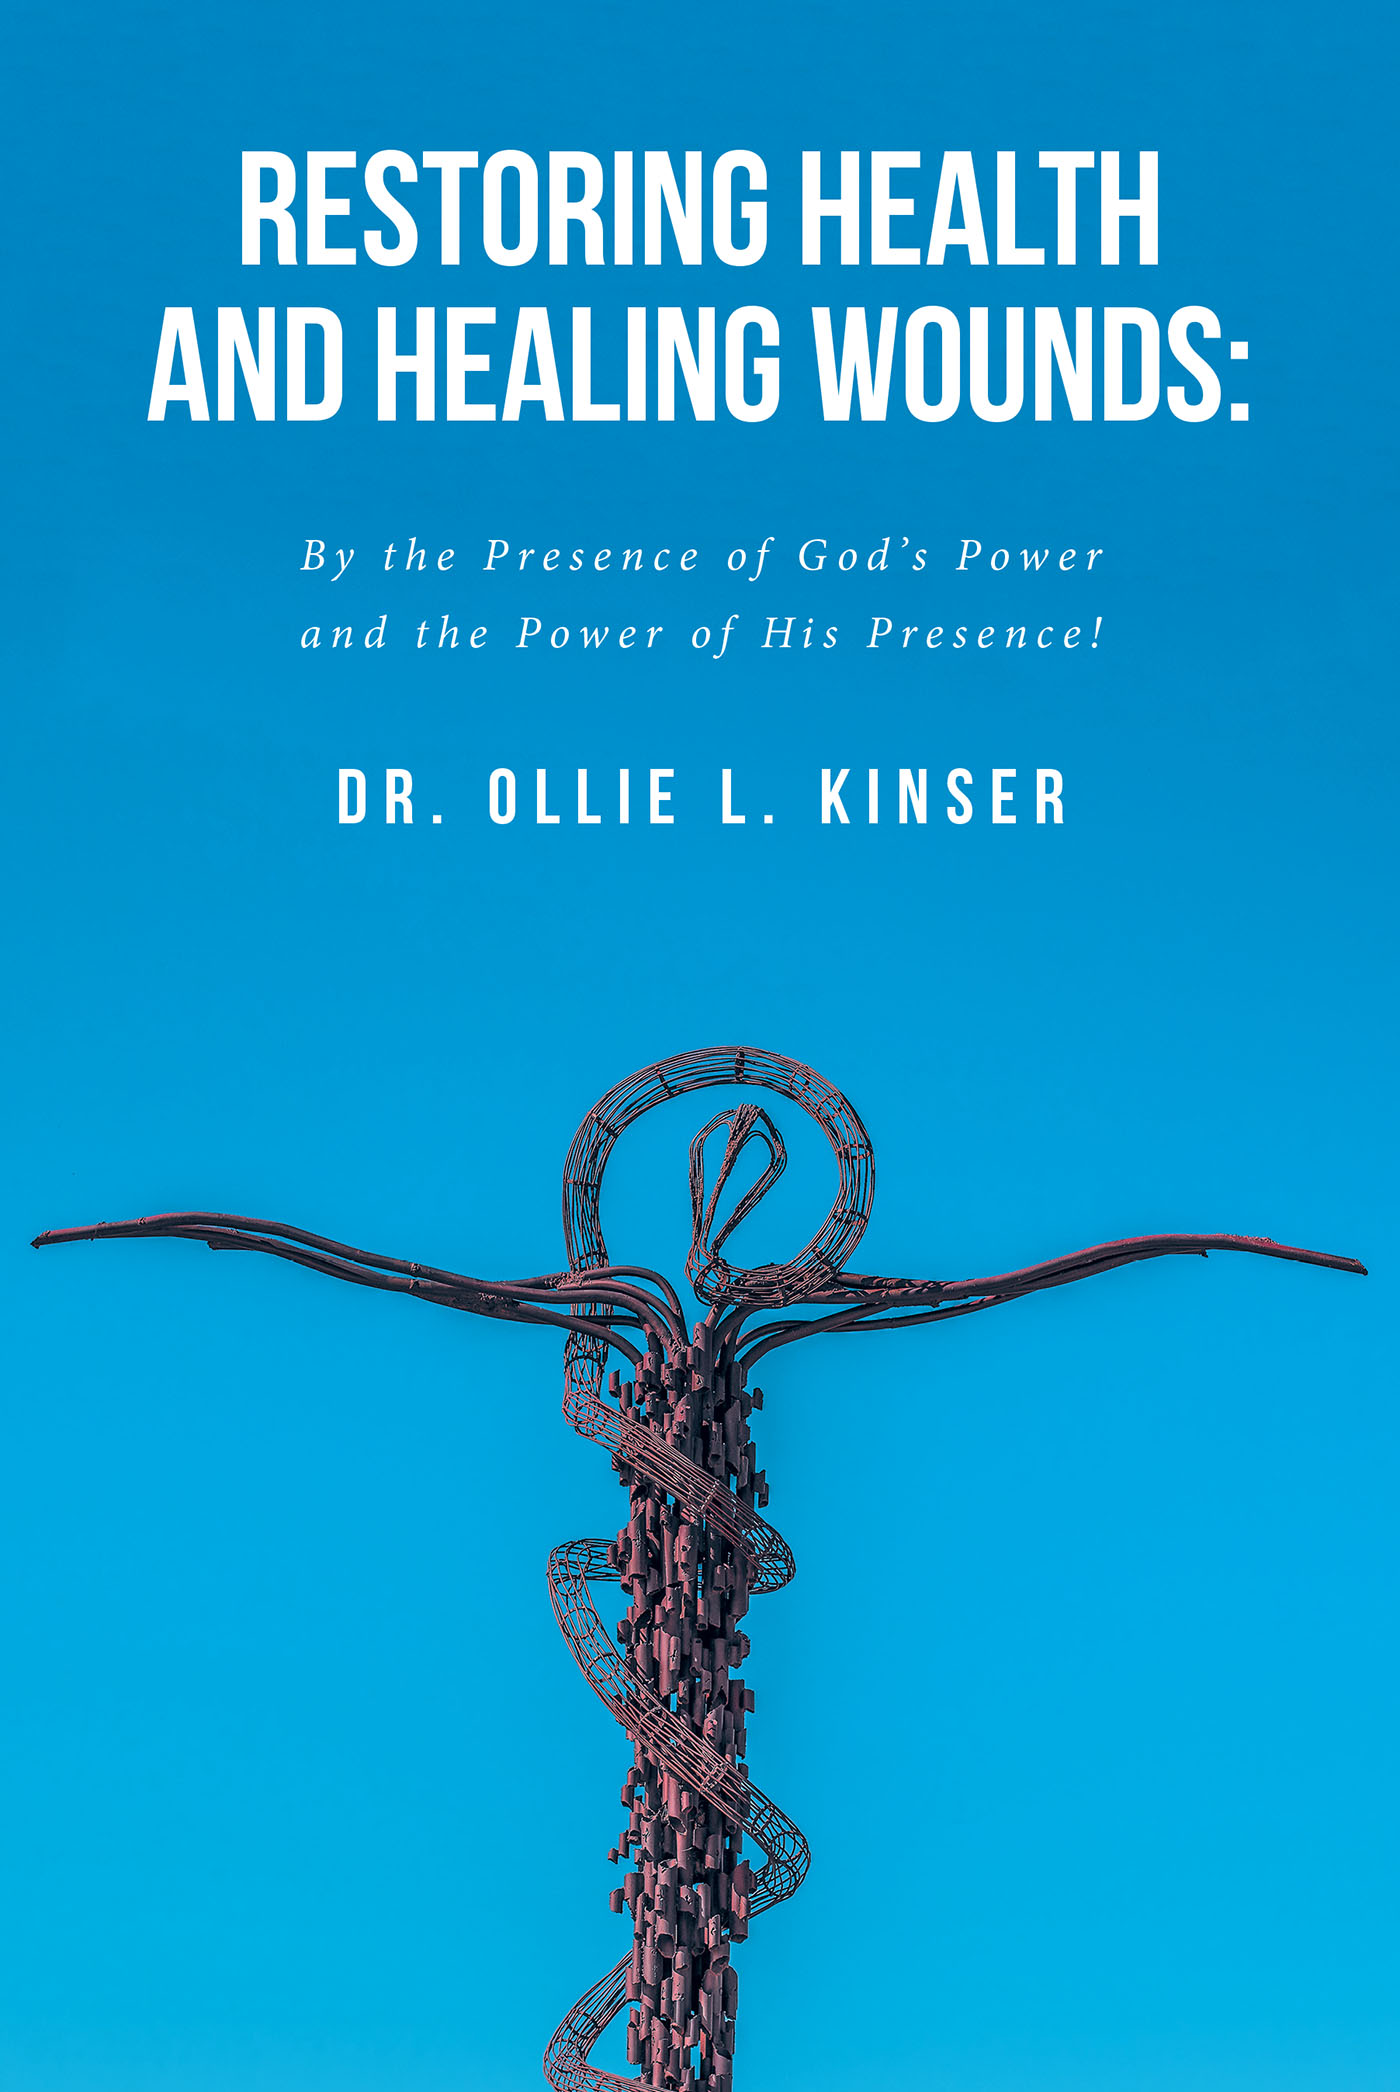 Dr. Ollie L. Kinser’s New Book, "Restoring Health and Healing Wounds," is an Inspiring Work About the Presence of God and His Restorative Powers as Written in Scripture